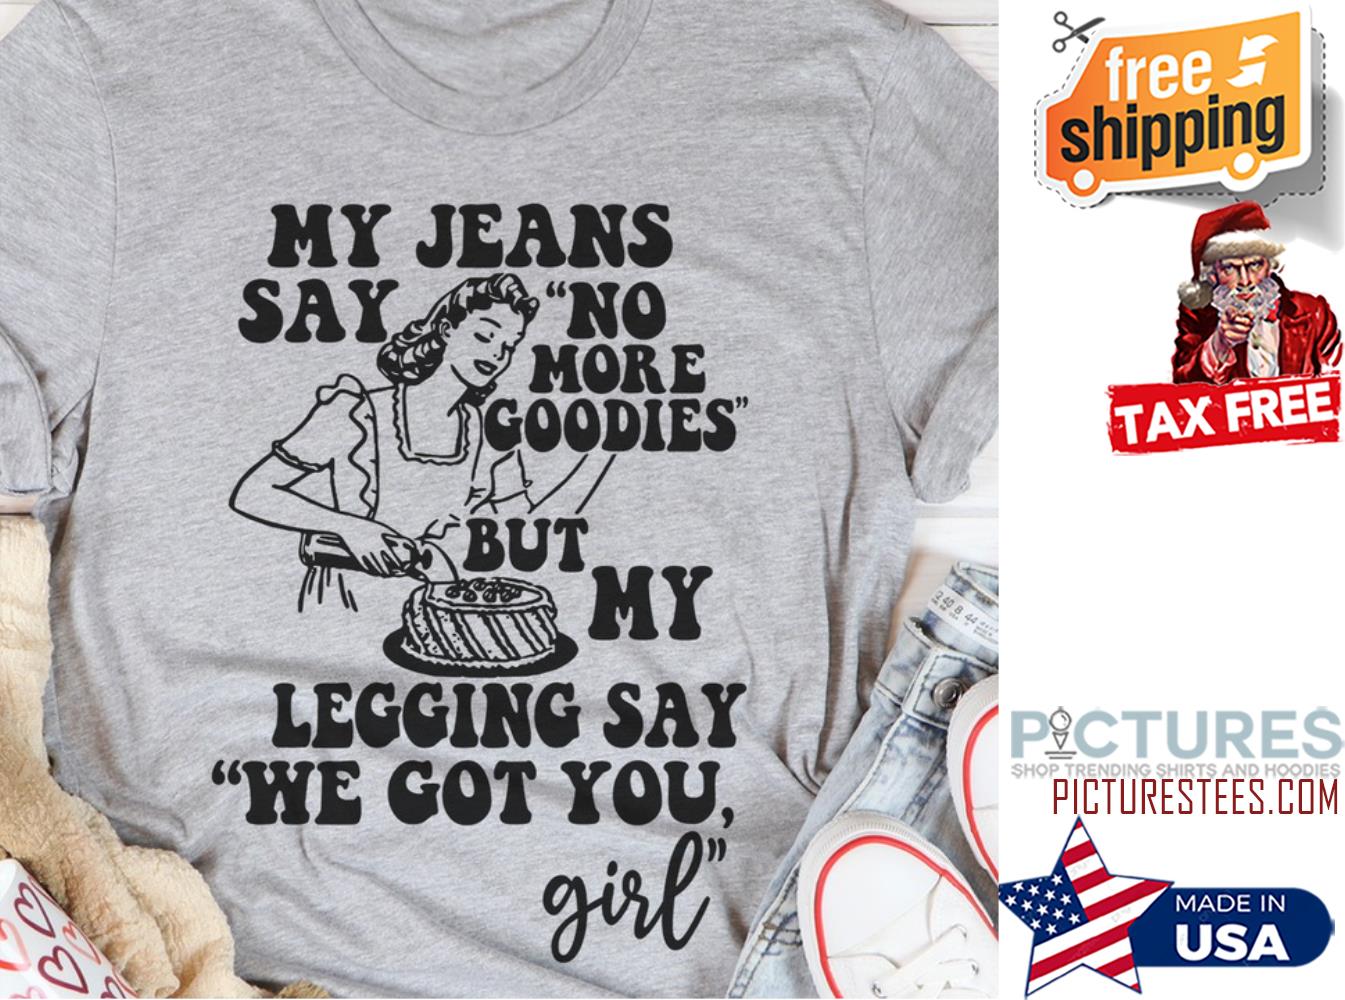 https://images.picturestees.com/2022/01/my-jeans-say-no-more-goodies-but-my-legging-say-we-got-you-girl-shirt-picturestees-shirt.jpg